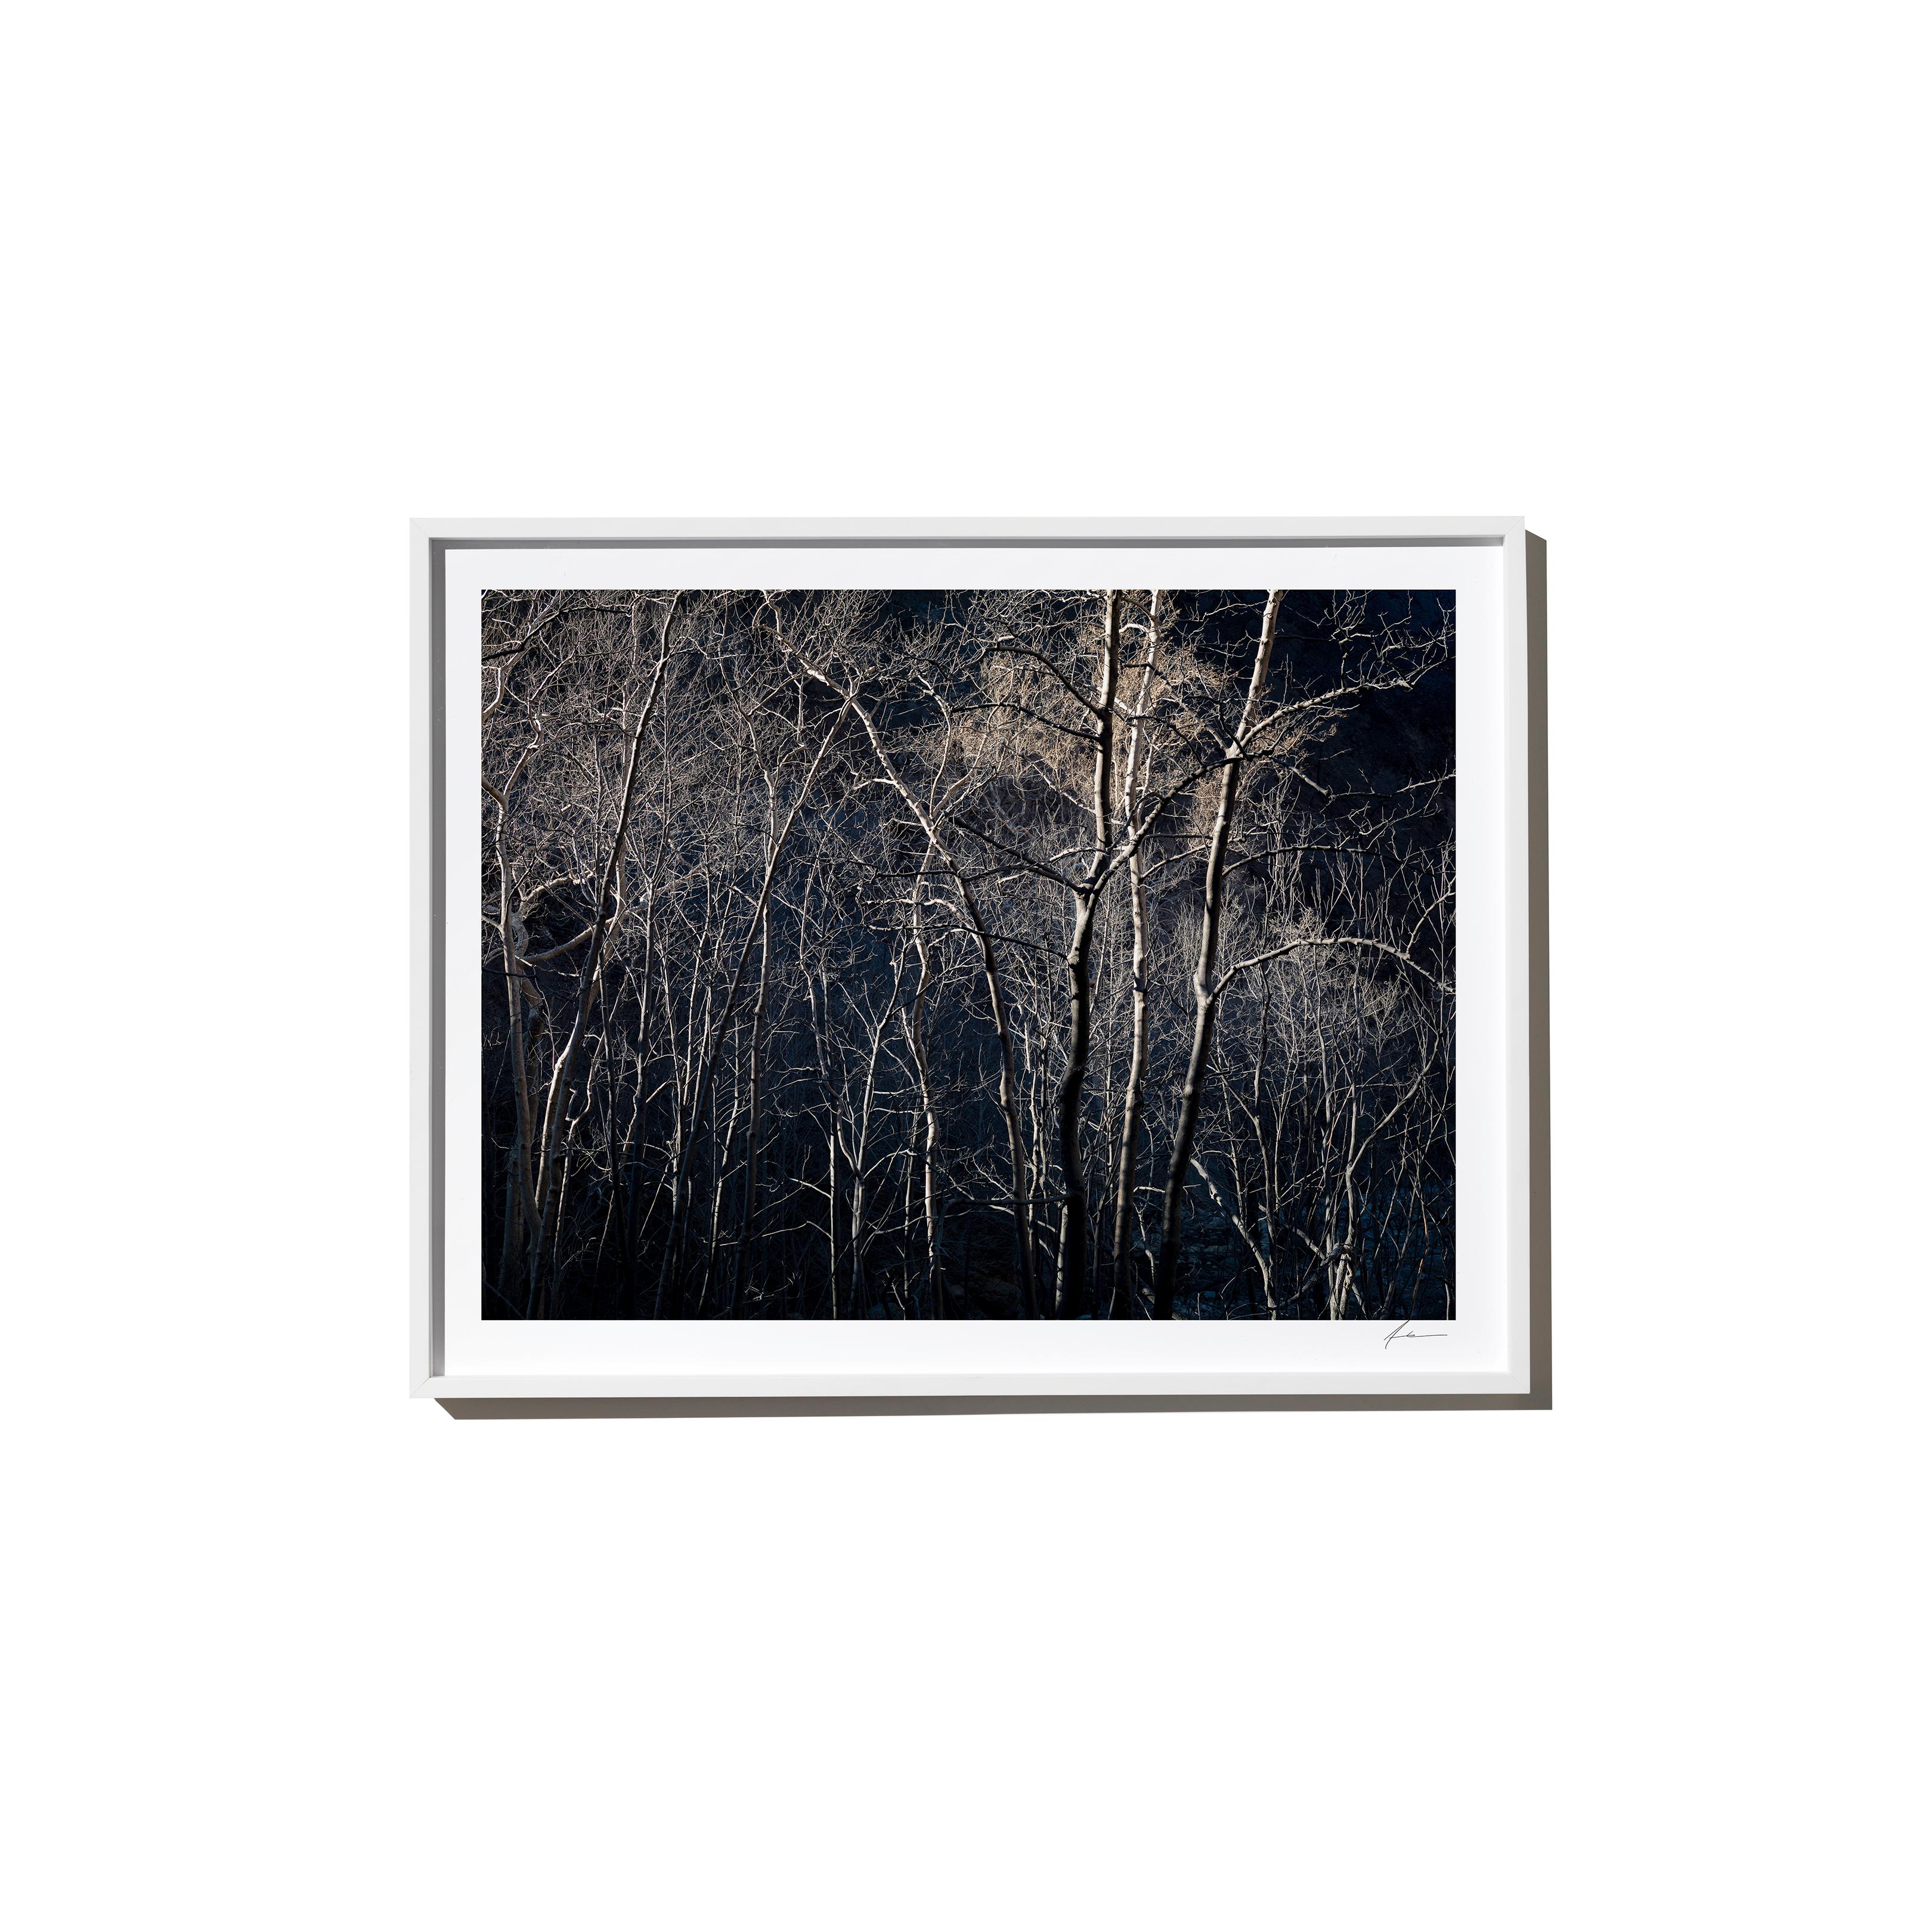 Strand, 2017, from the Survivors series (Framed Color Landscape Photography) - Print by Timothy Hogan